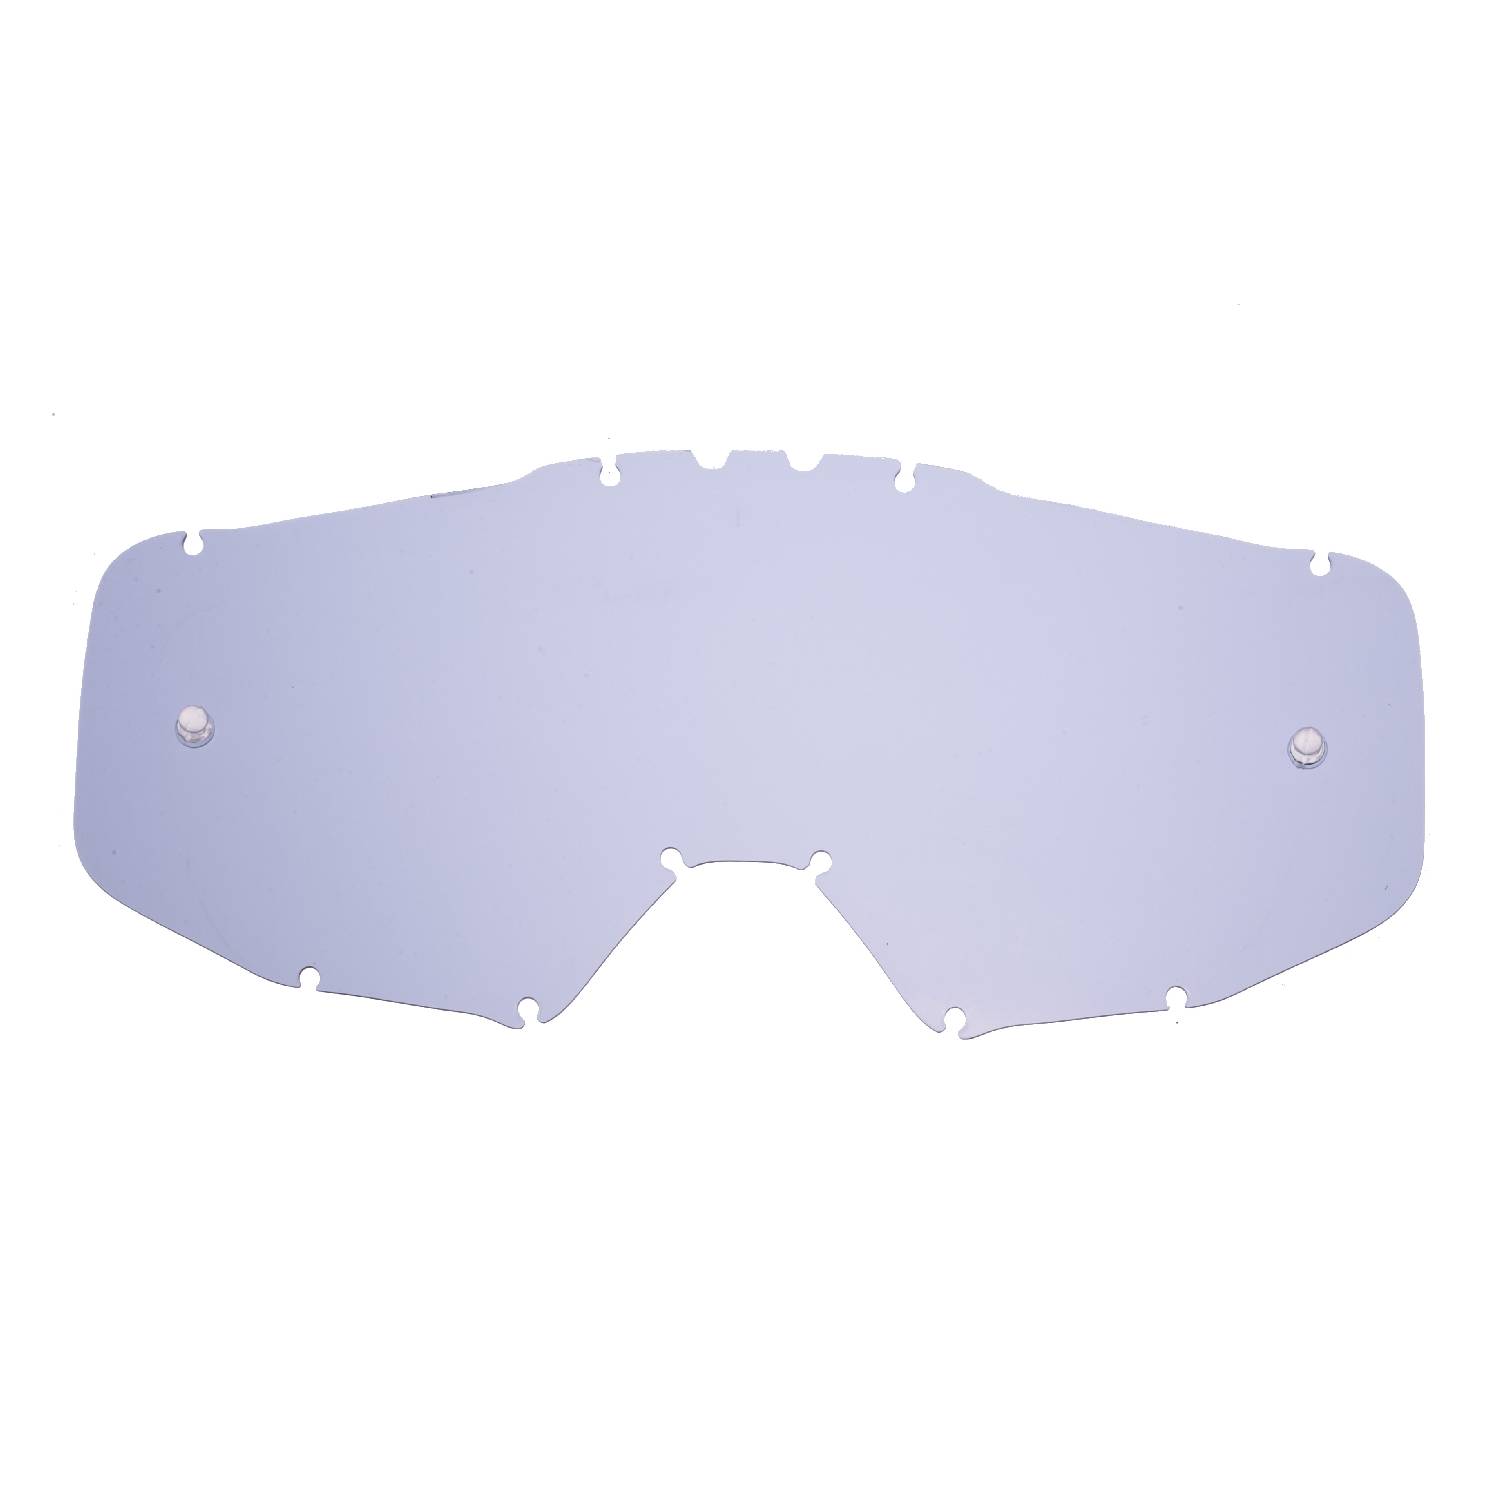 smokey replacement lenses for goggles compatible for Just1 Iris / Vitro goggle